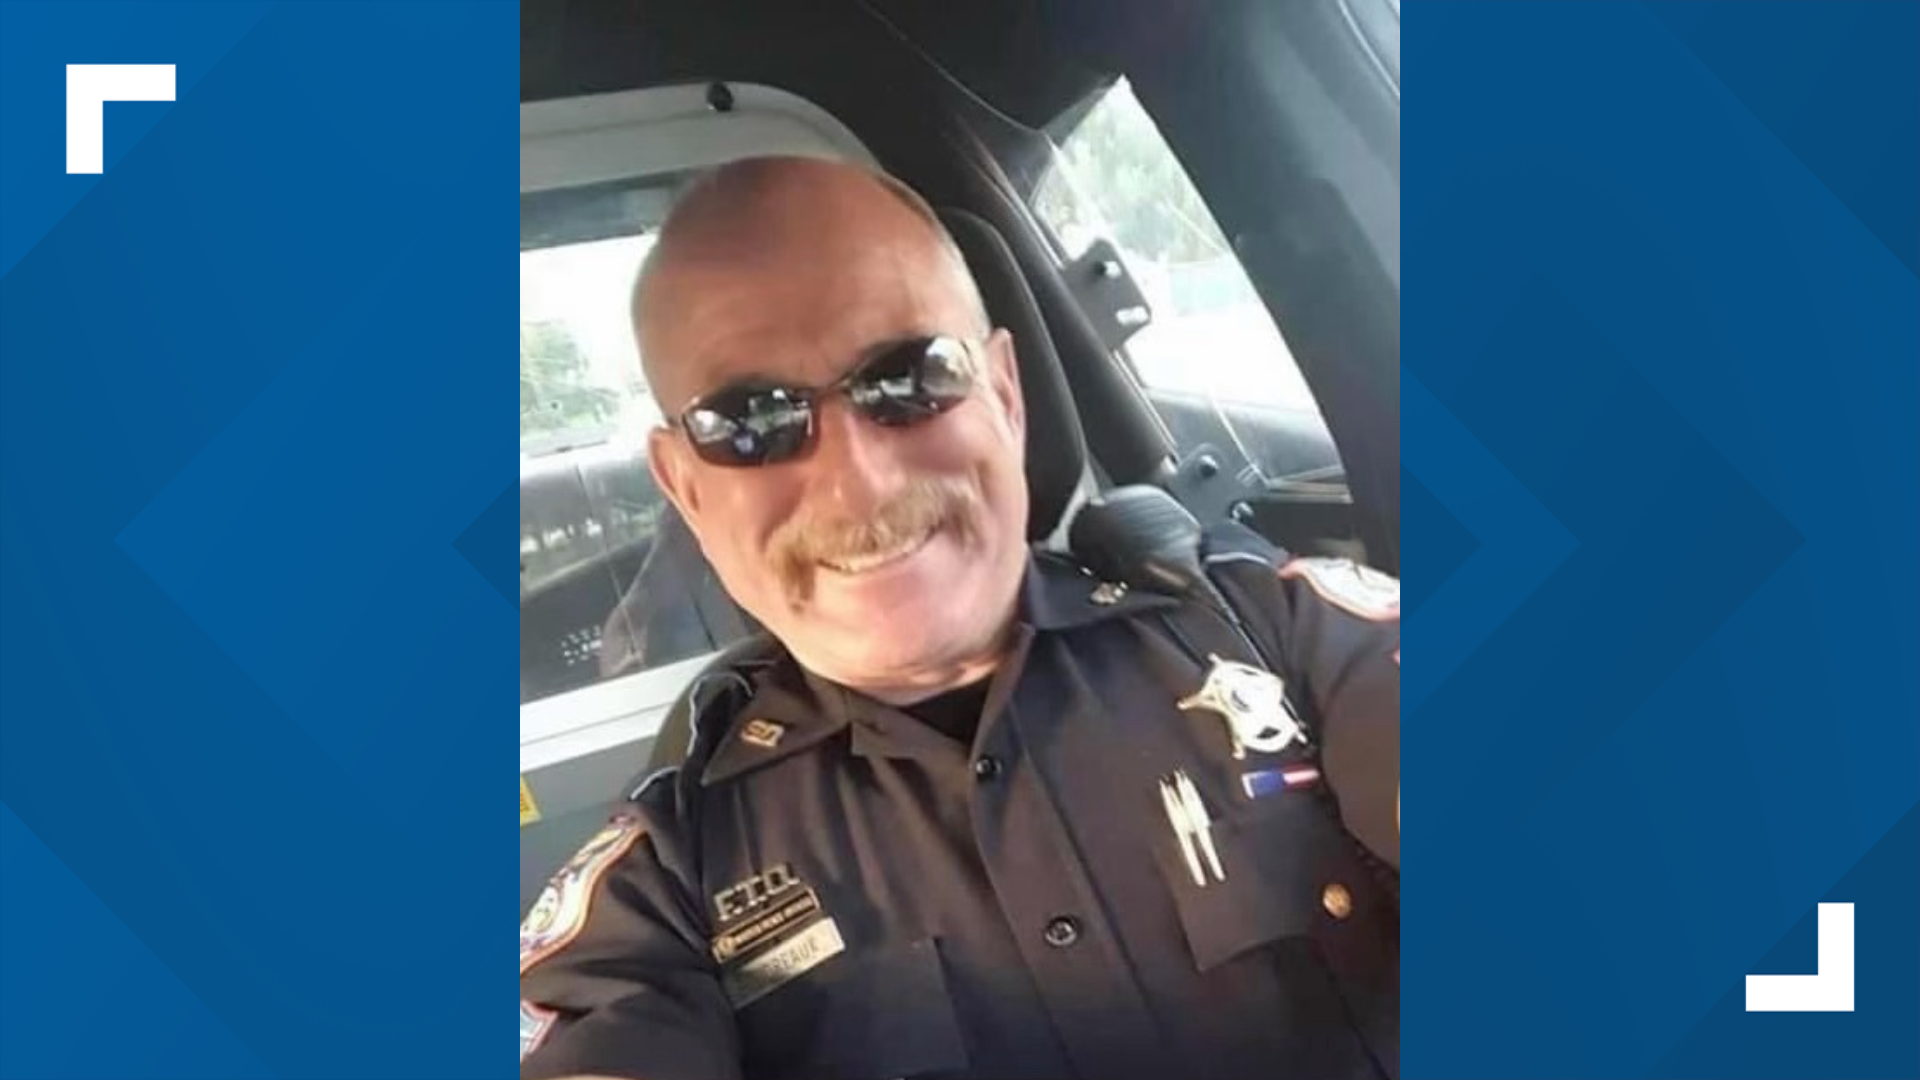 Deputy Craig Boudreaux, 59, died Saturday morning after being hospitalized with COVID-19.